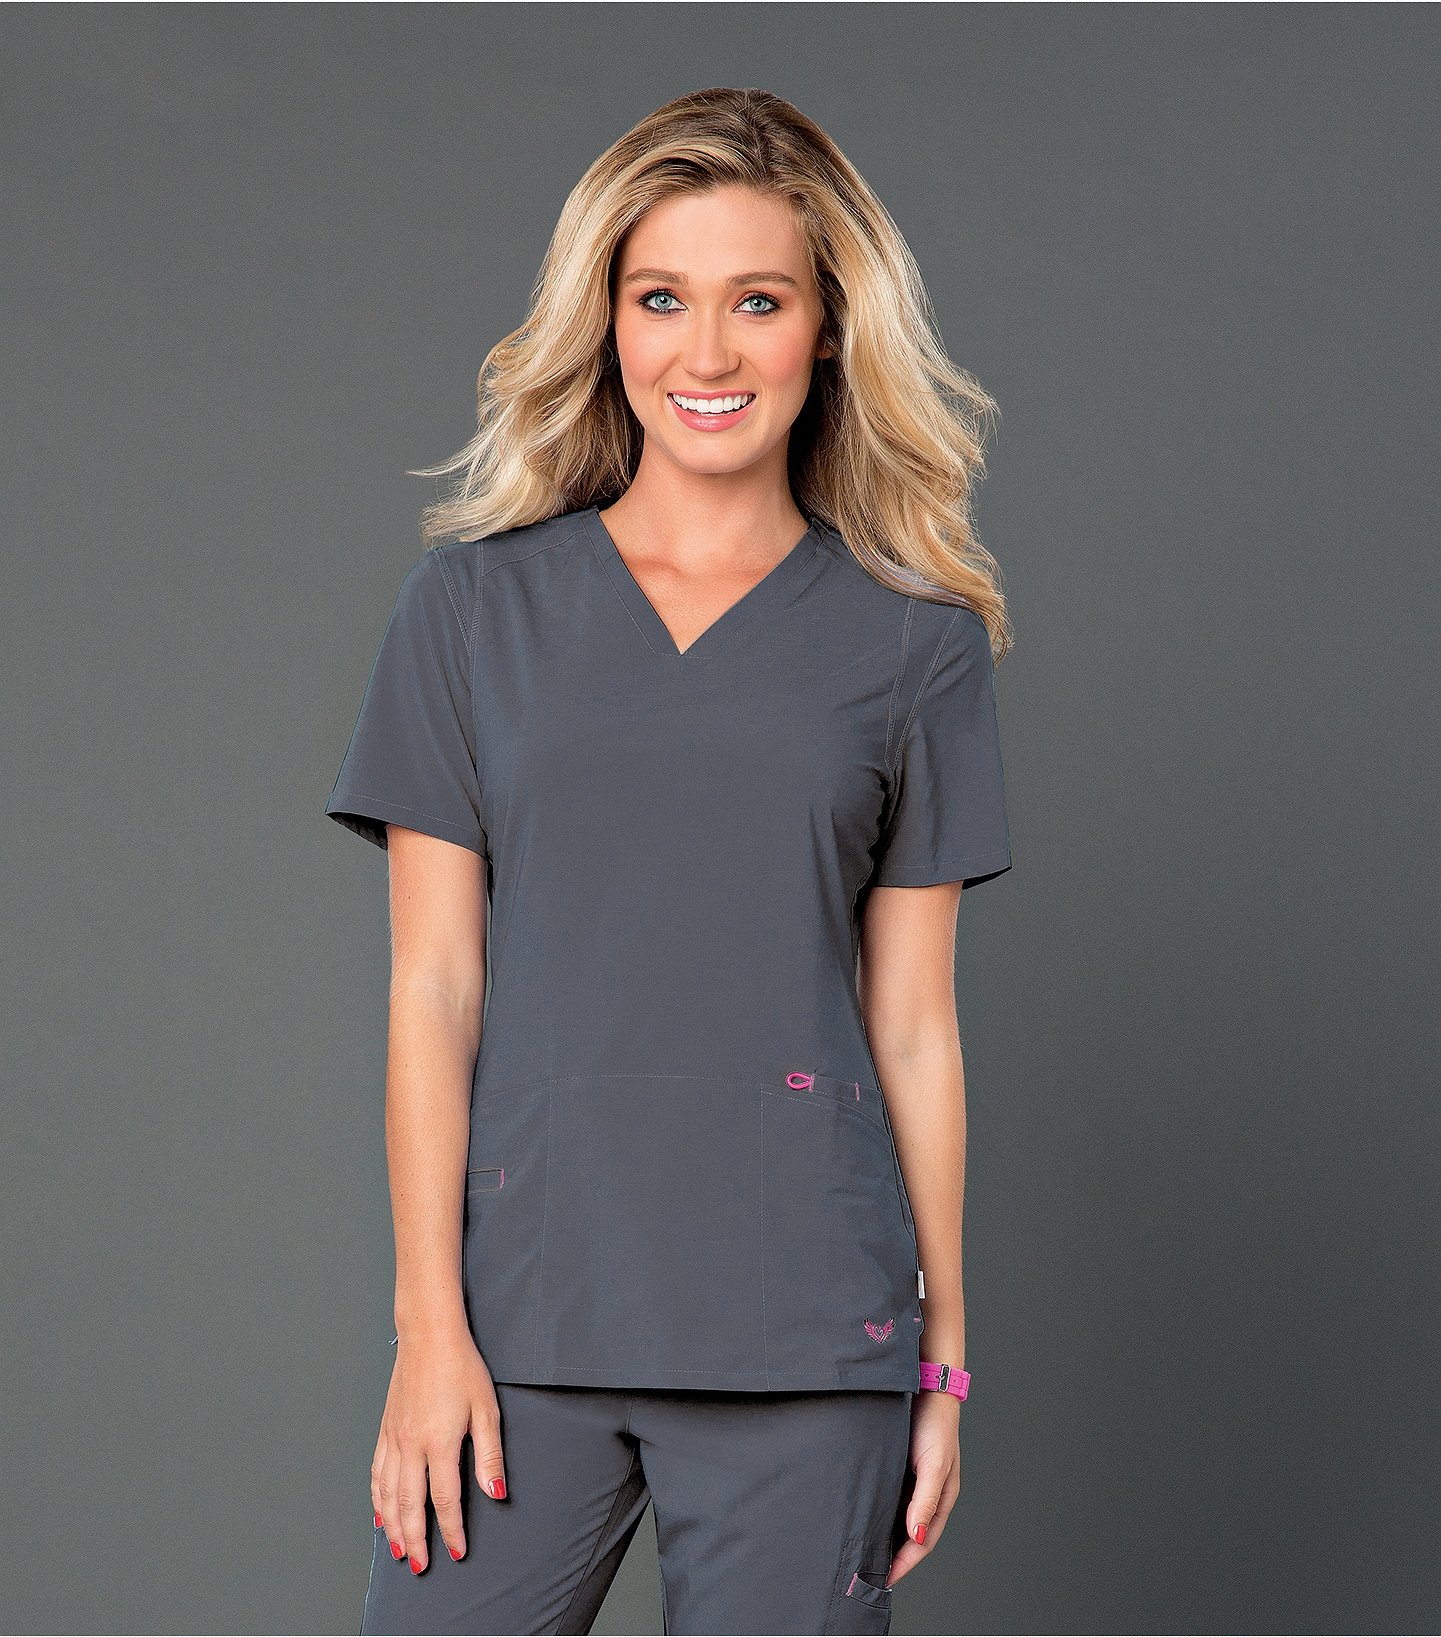 Smitten Womens Solid Athletic Fit V Neck Scrub Top S101002 Medical Scrubs Collection